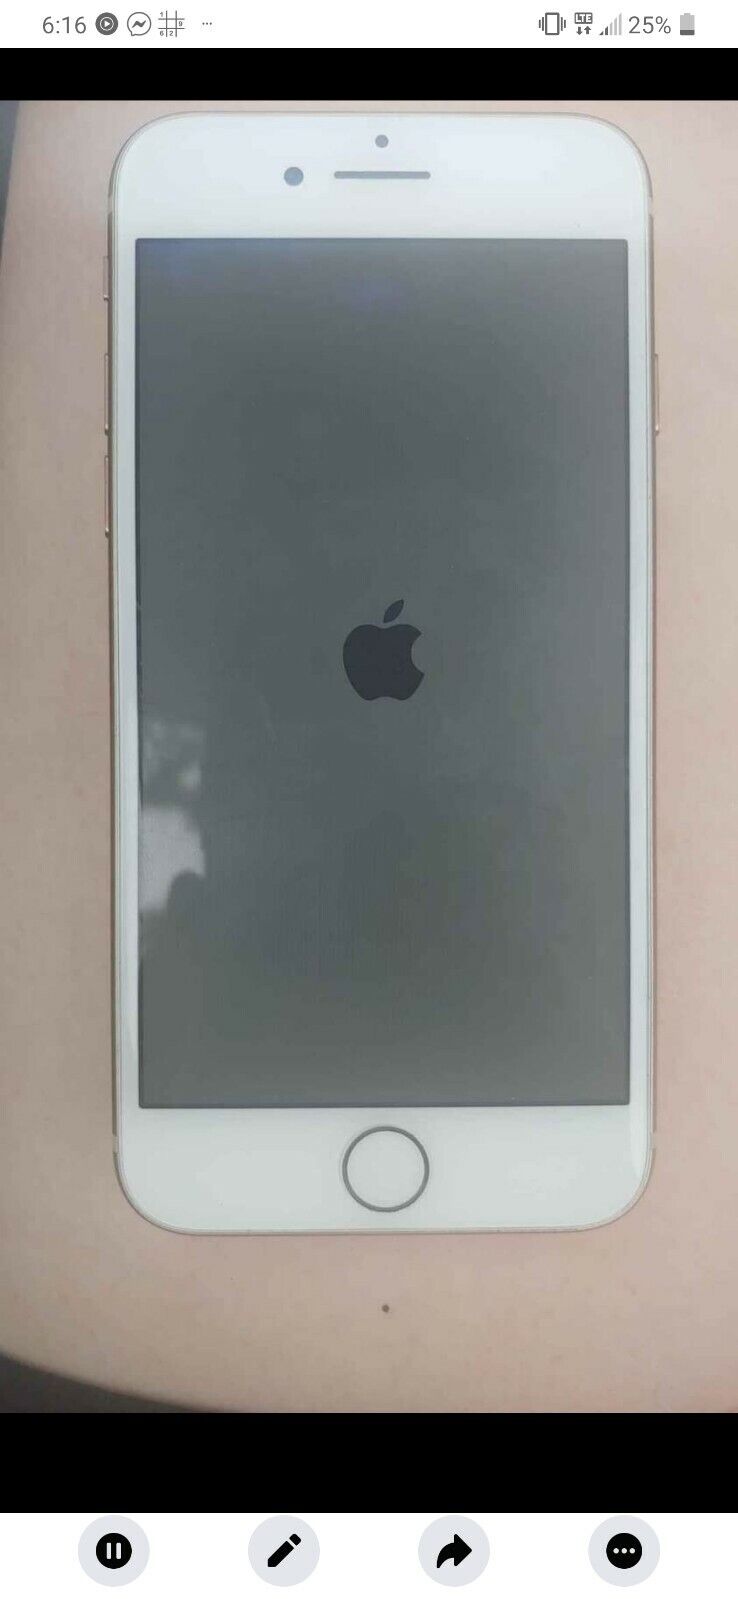 Apple iPhone 8 - 128GB - Gold (T-Mobile) A1905 (GSM)